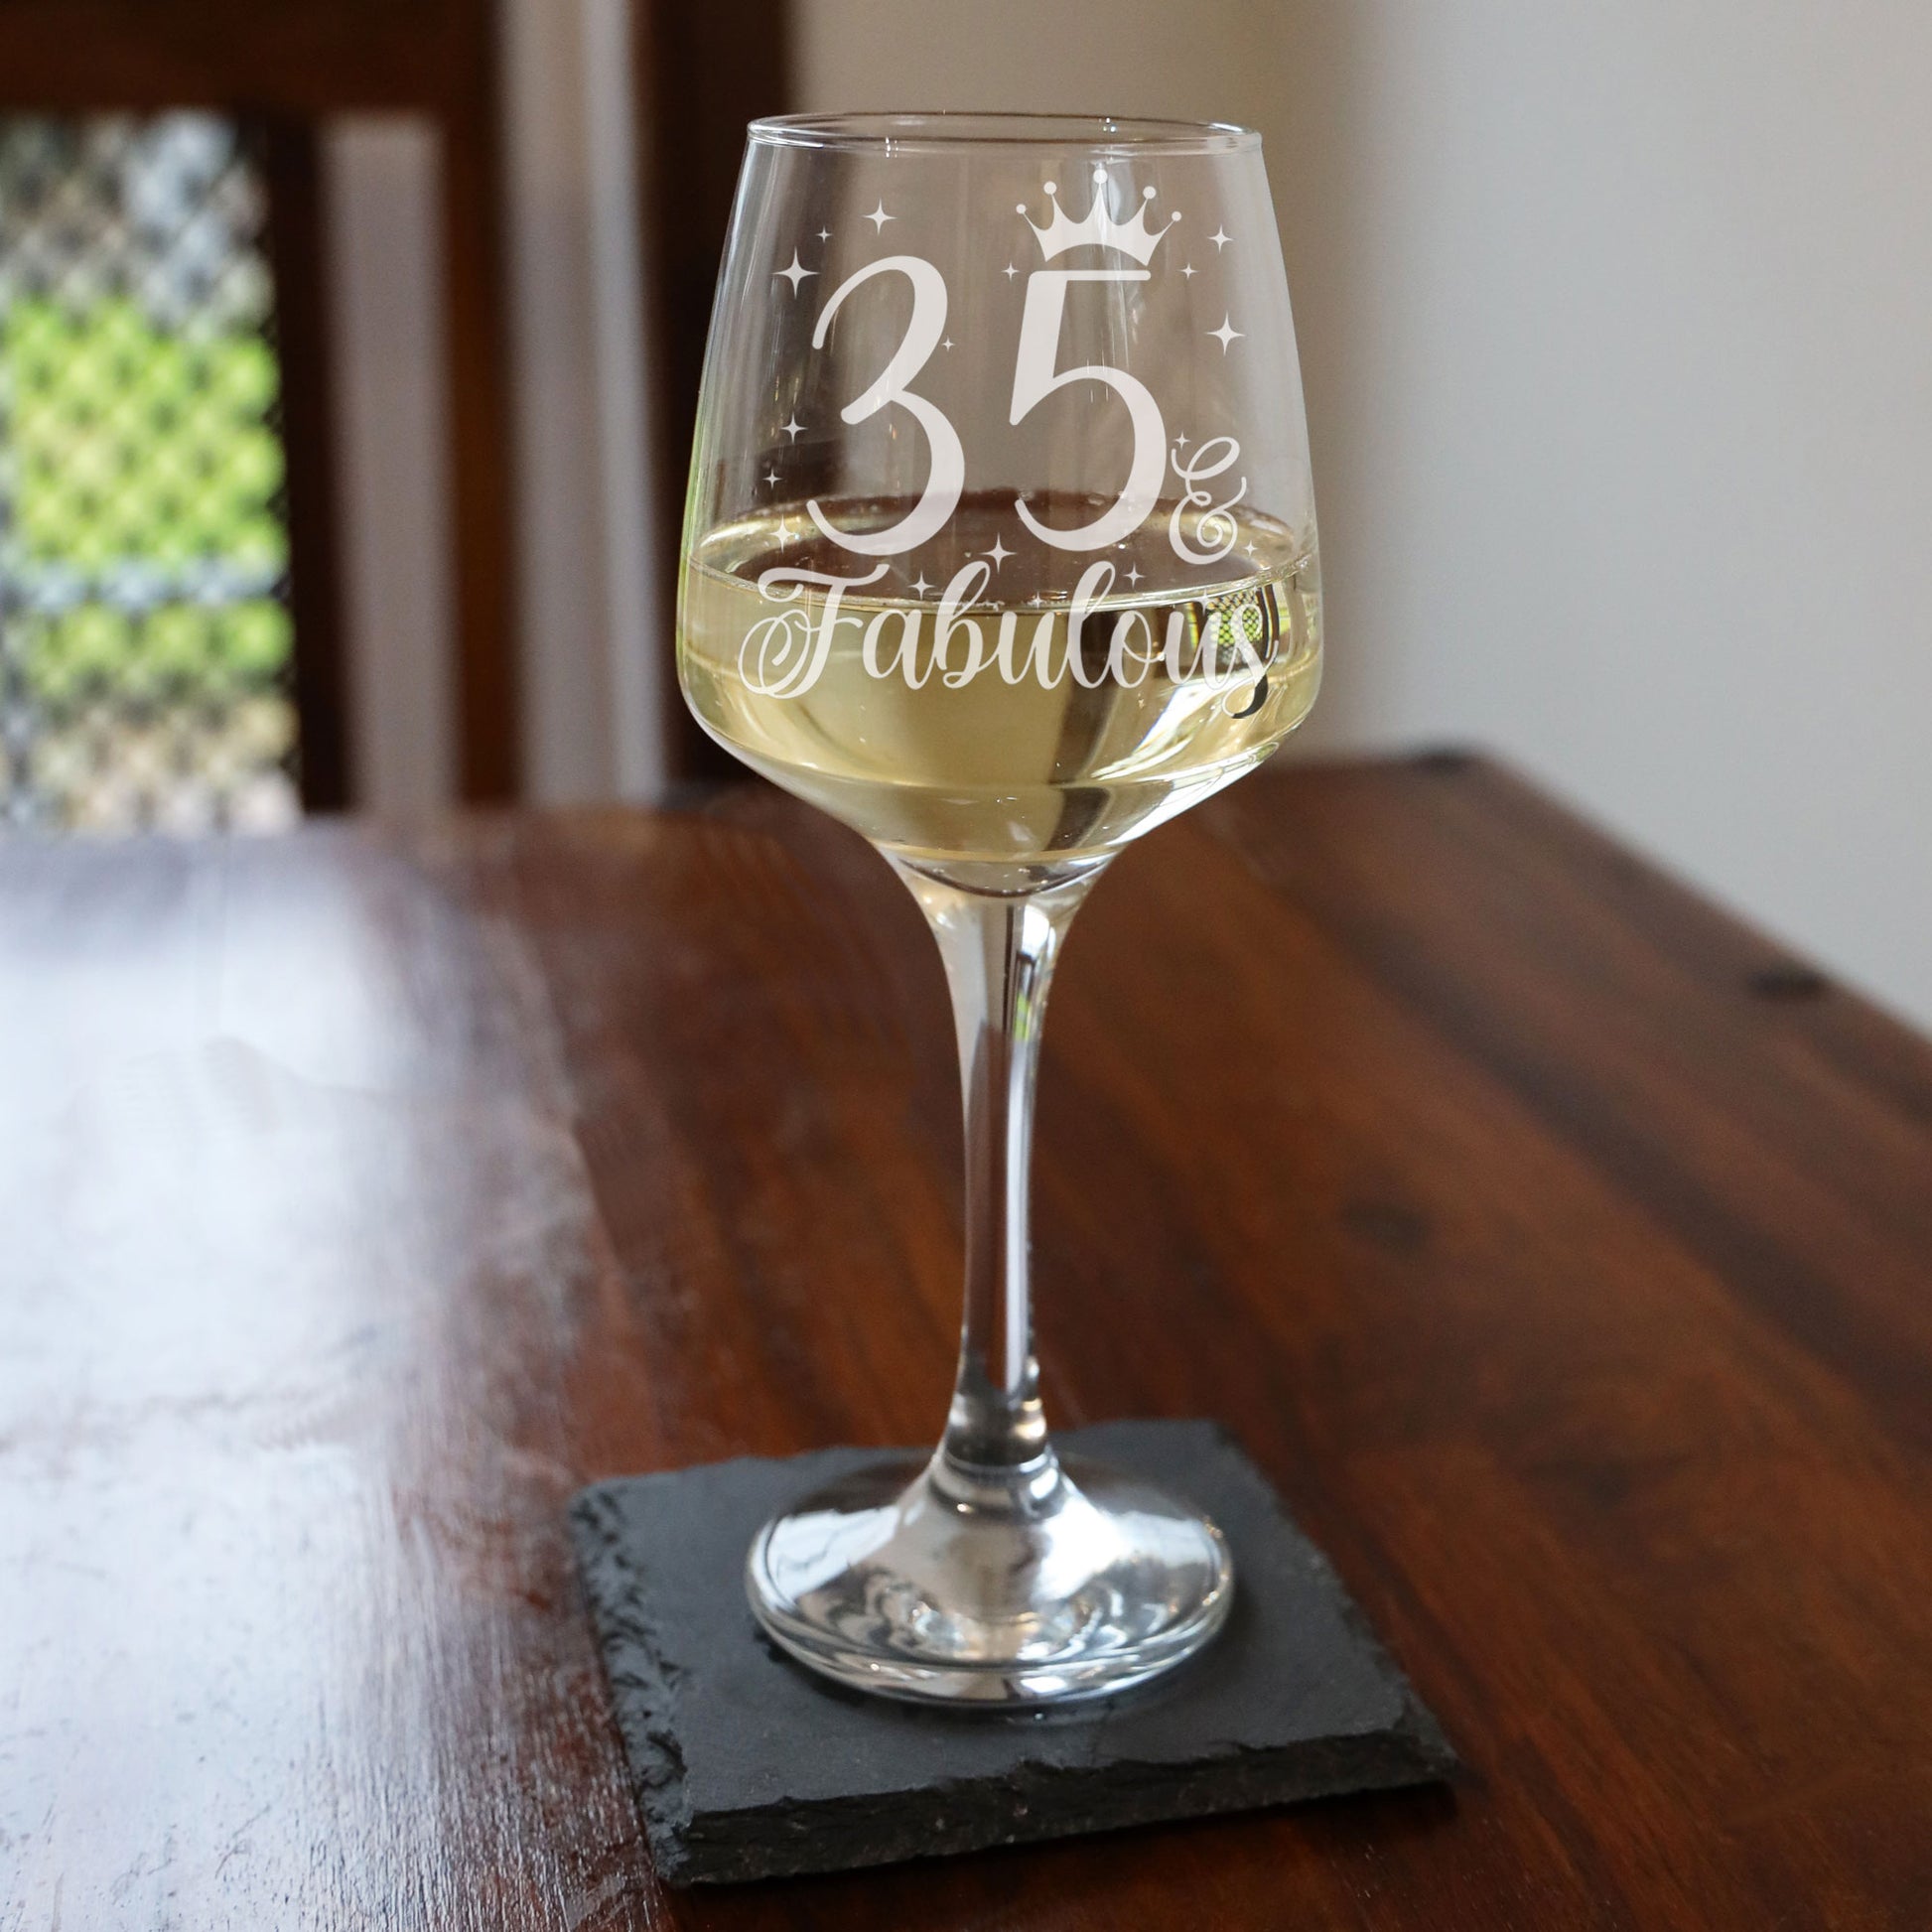 35 & Fabulous 35th Birthday Gift Engraved Wine Glass and/or Coaster Set  - Always Looking Good - Wine Glass Only  